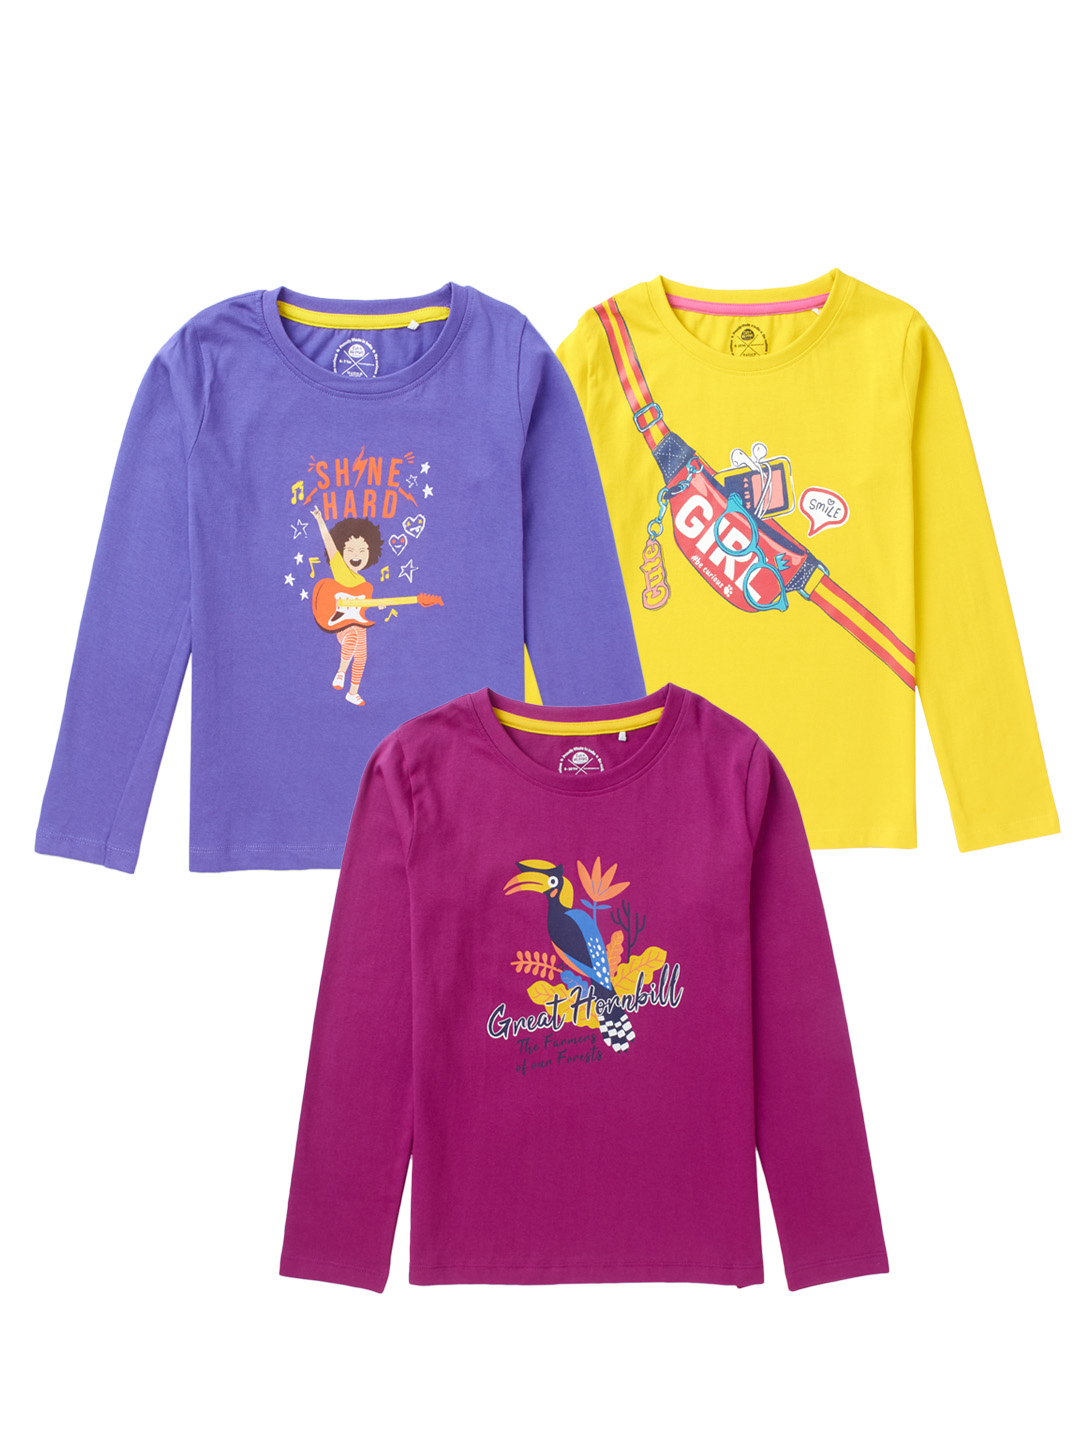 Girls 100% Cotton Full Sleeves Pack of 3 T-Shirts